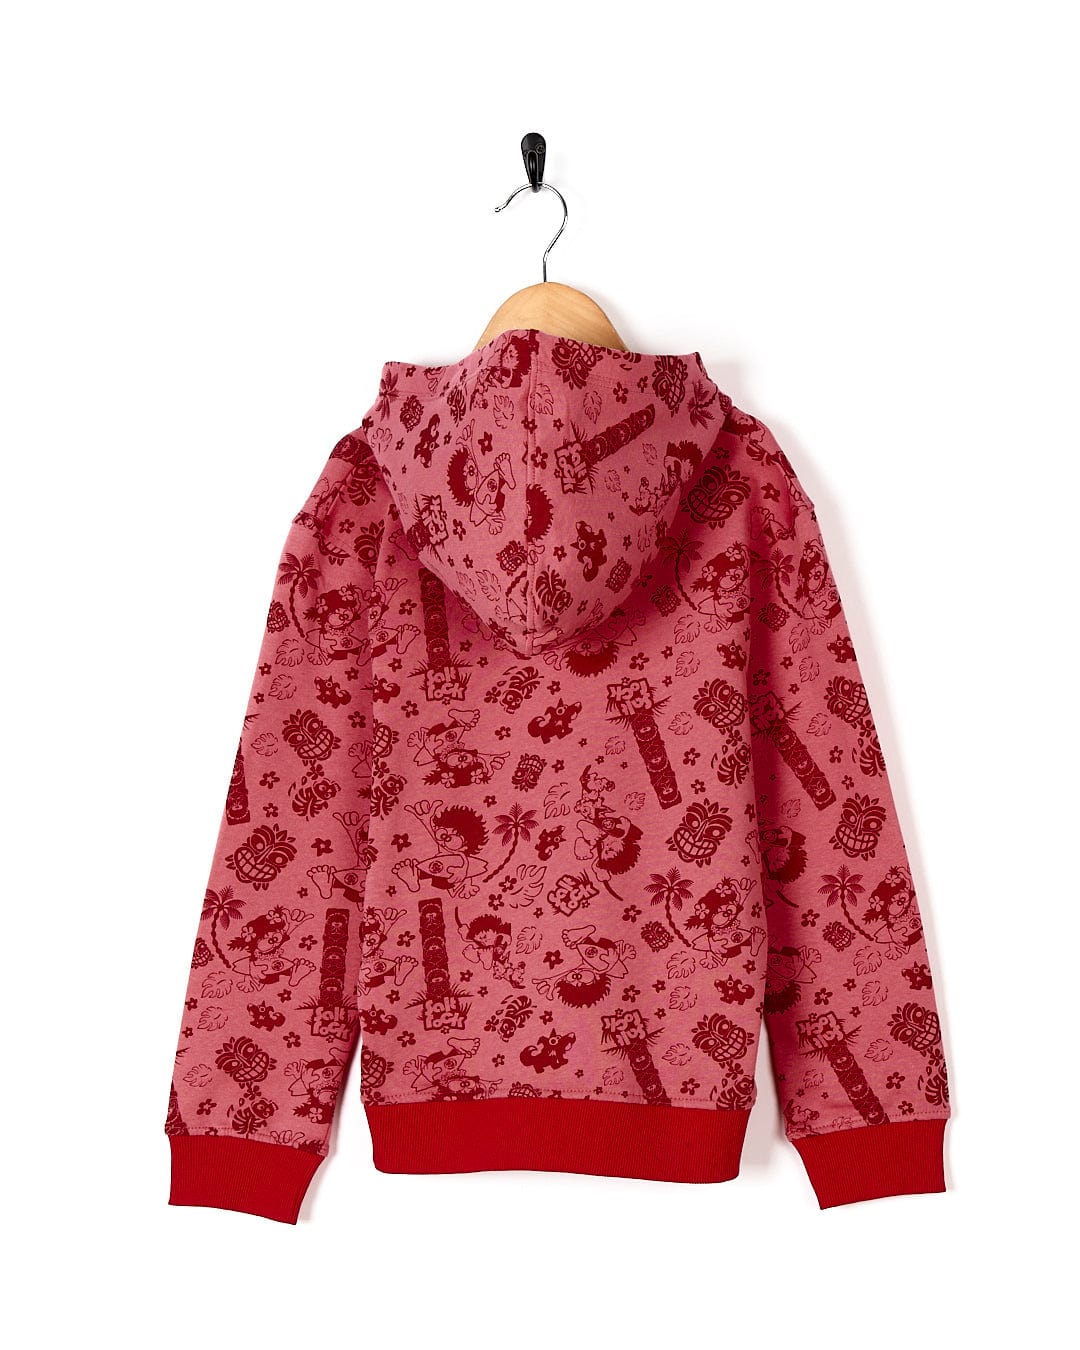 A Saltrock Tiki Tok - Kids Pop Hoodie - Red with a red and white pattern.